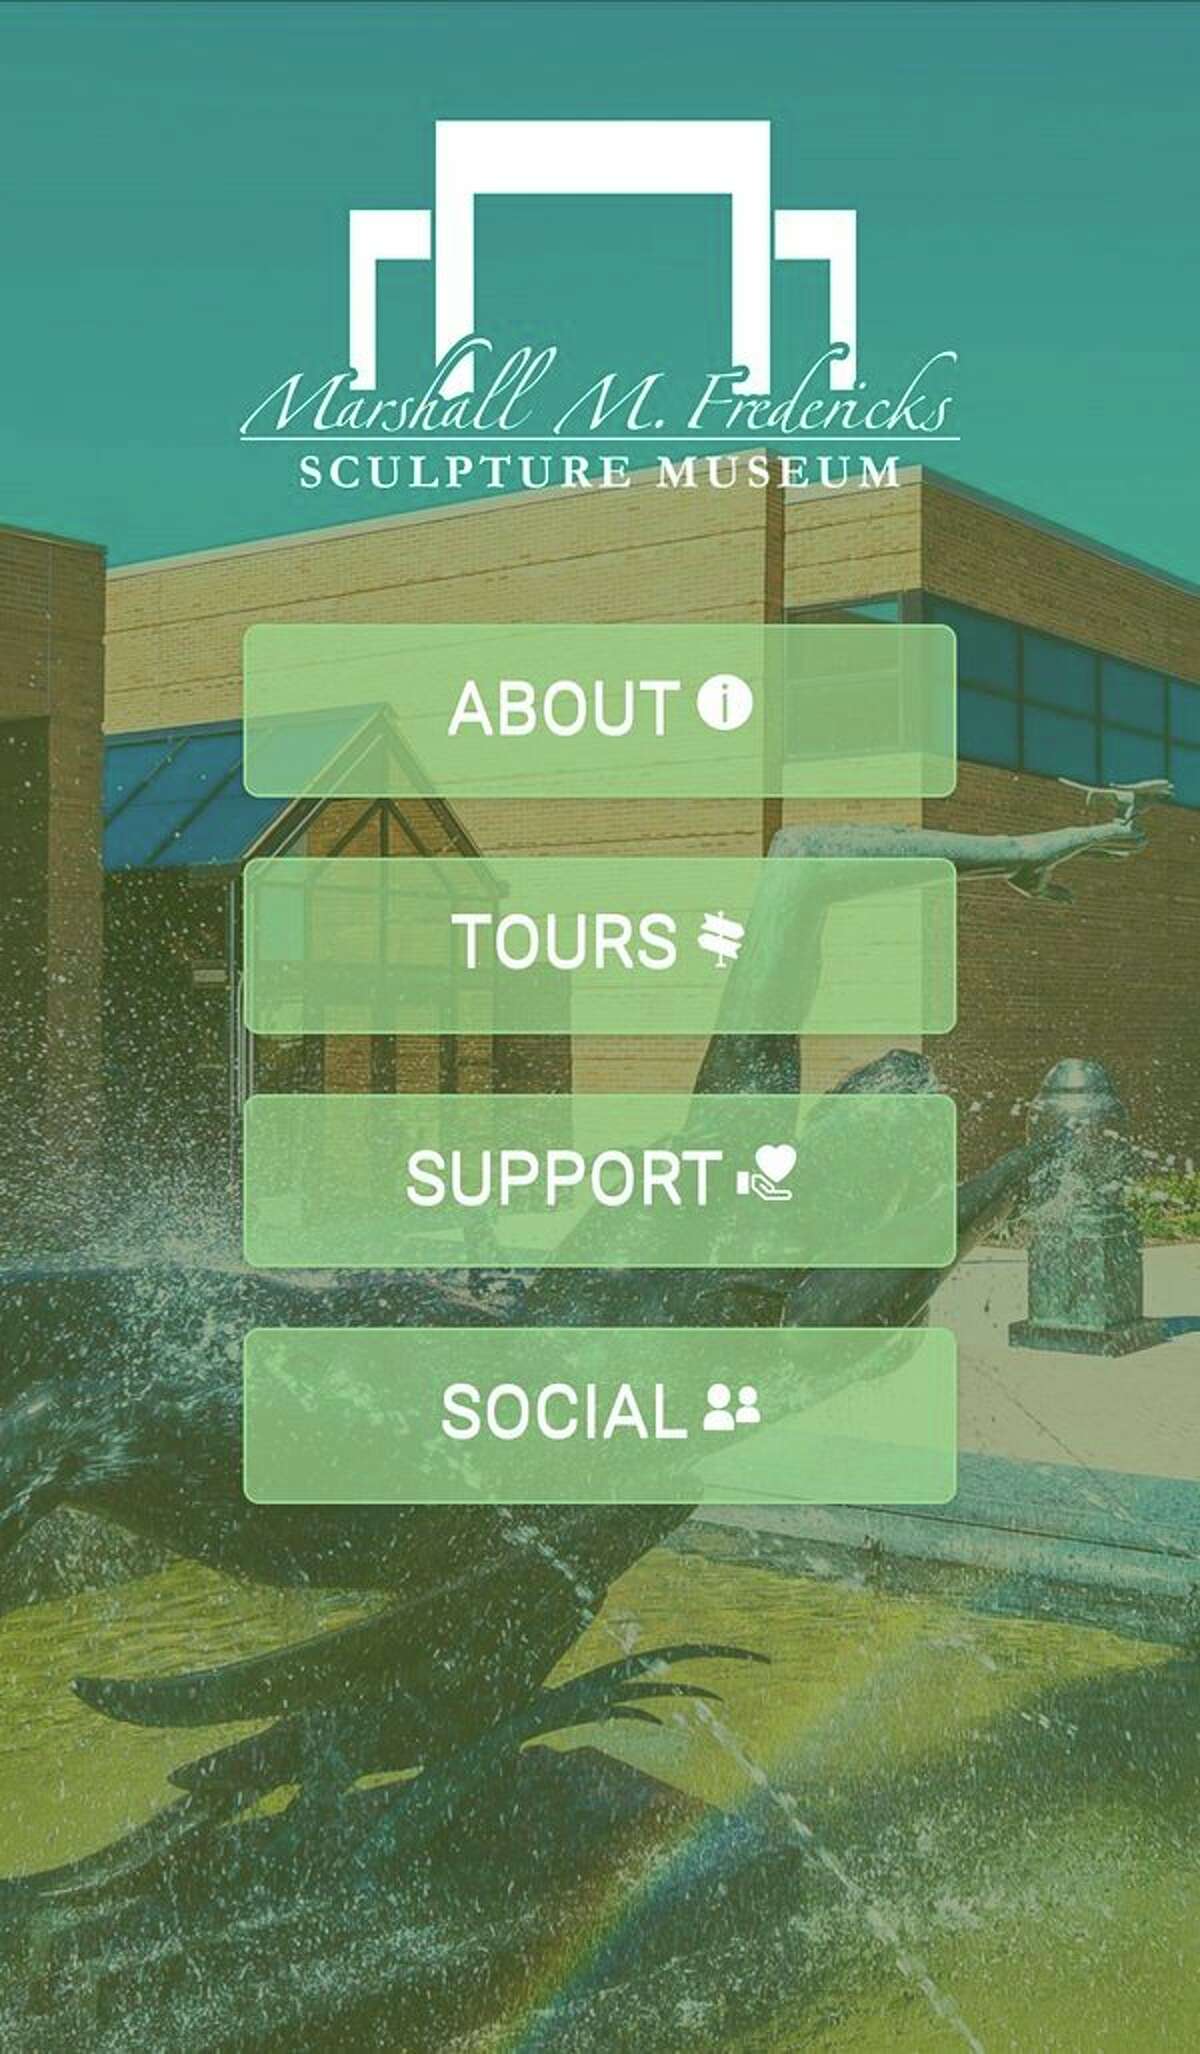 The Marshall M. Fredericks Sculpture Museum has launched a new app designed to allow visitors to tour the galleries and sculpture garden on their smartphones. The free app is available on both iOS and Android via the Apple App Store and Google Play Store. It can be downloaded in advance of a visit or in the gallery on the museum's free Wi-Fi. (photo provided)